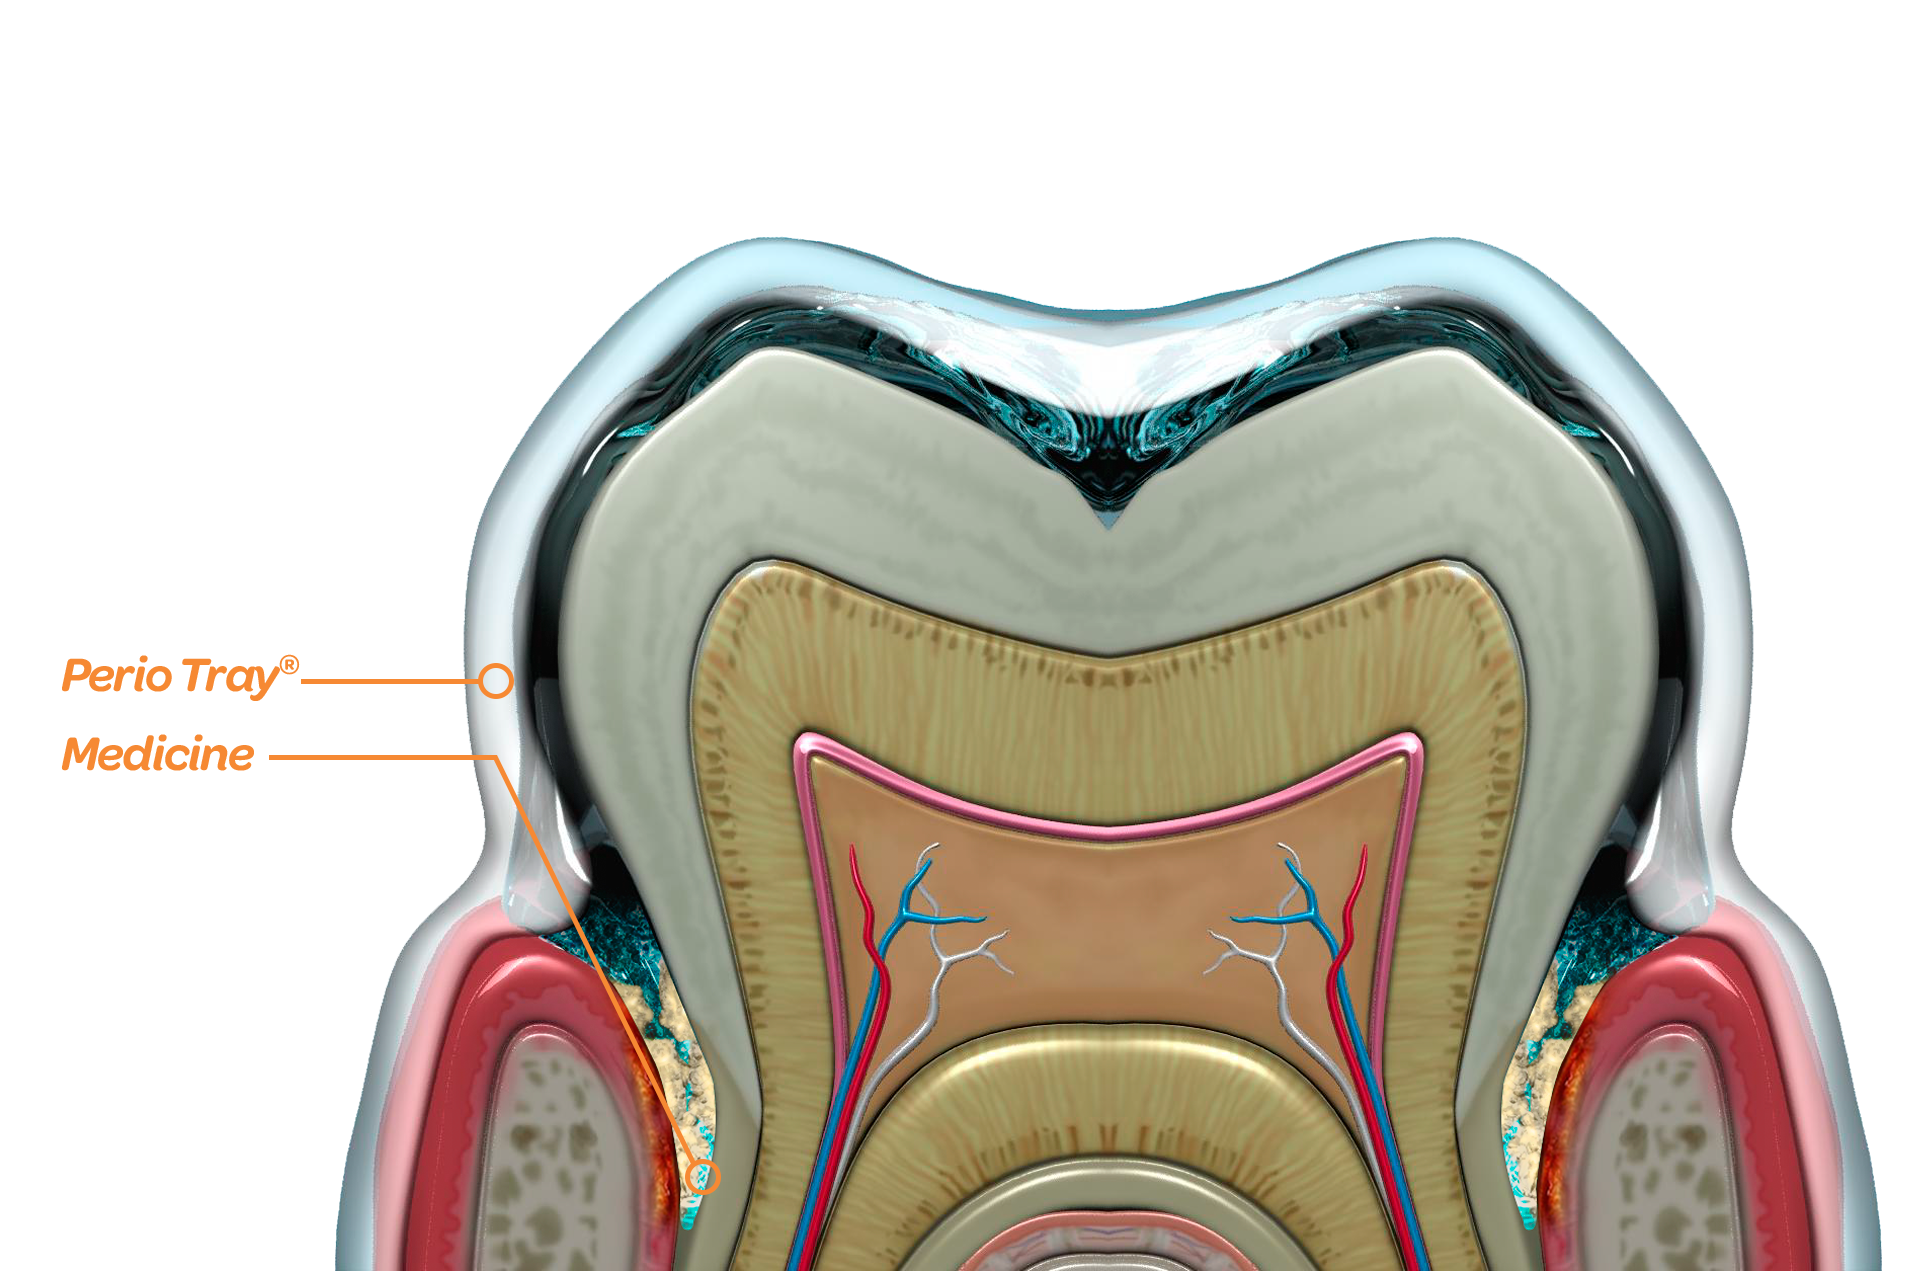 Graphic describing how the PerioProtect process works to treat gum disease.